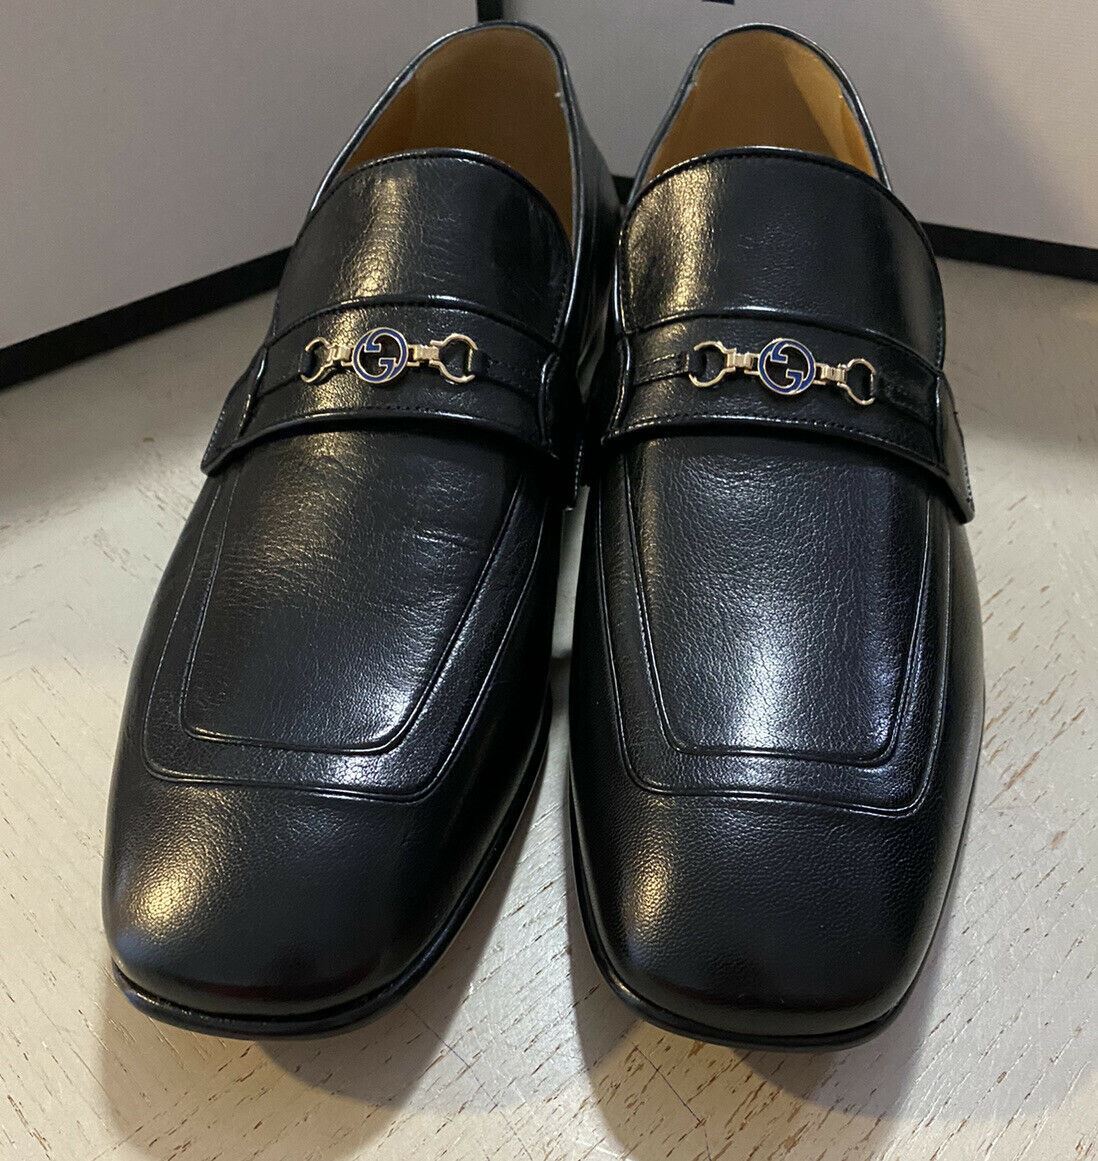 New Gucci Men’s GG Monogram Leather Loafers Shoes Black 9 US ( 8 UK ) Italy